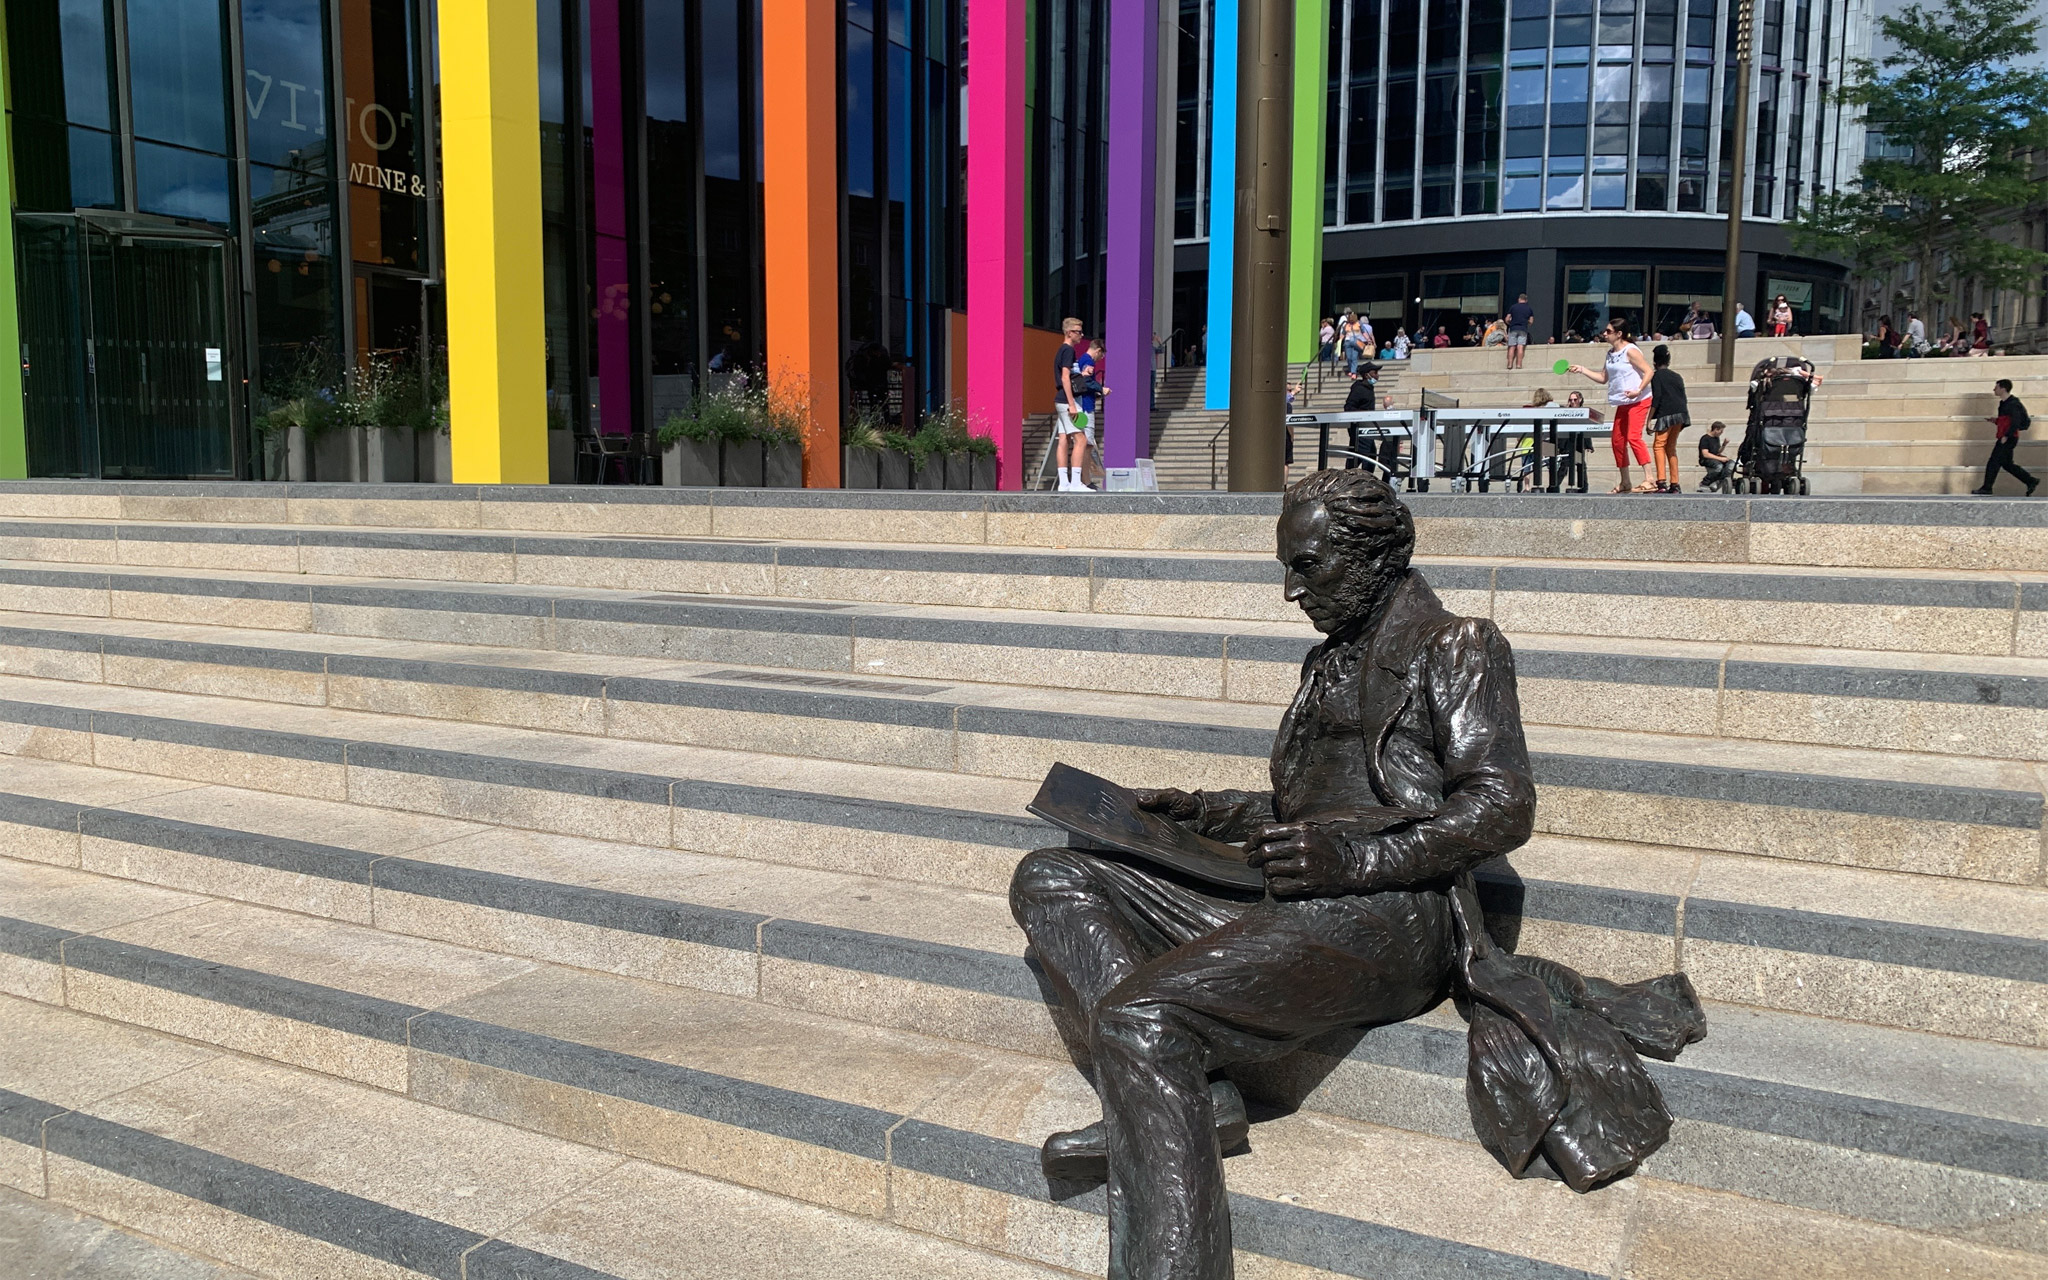 Thomas Attwood statue in Chamberlain Square, Paradise Birmingham. The columns of Two Chamberlain Square are painted in the Commonwealth Games colours behind him.